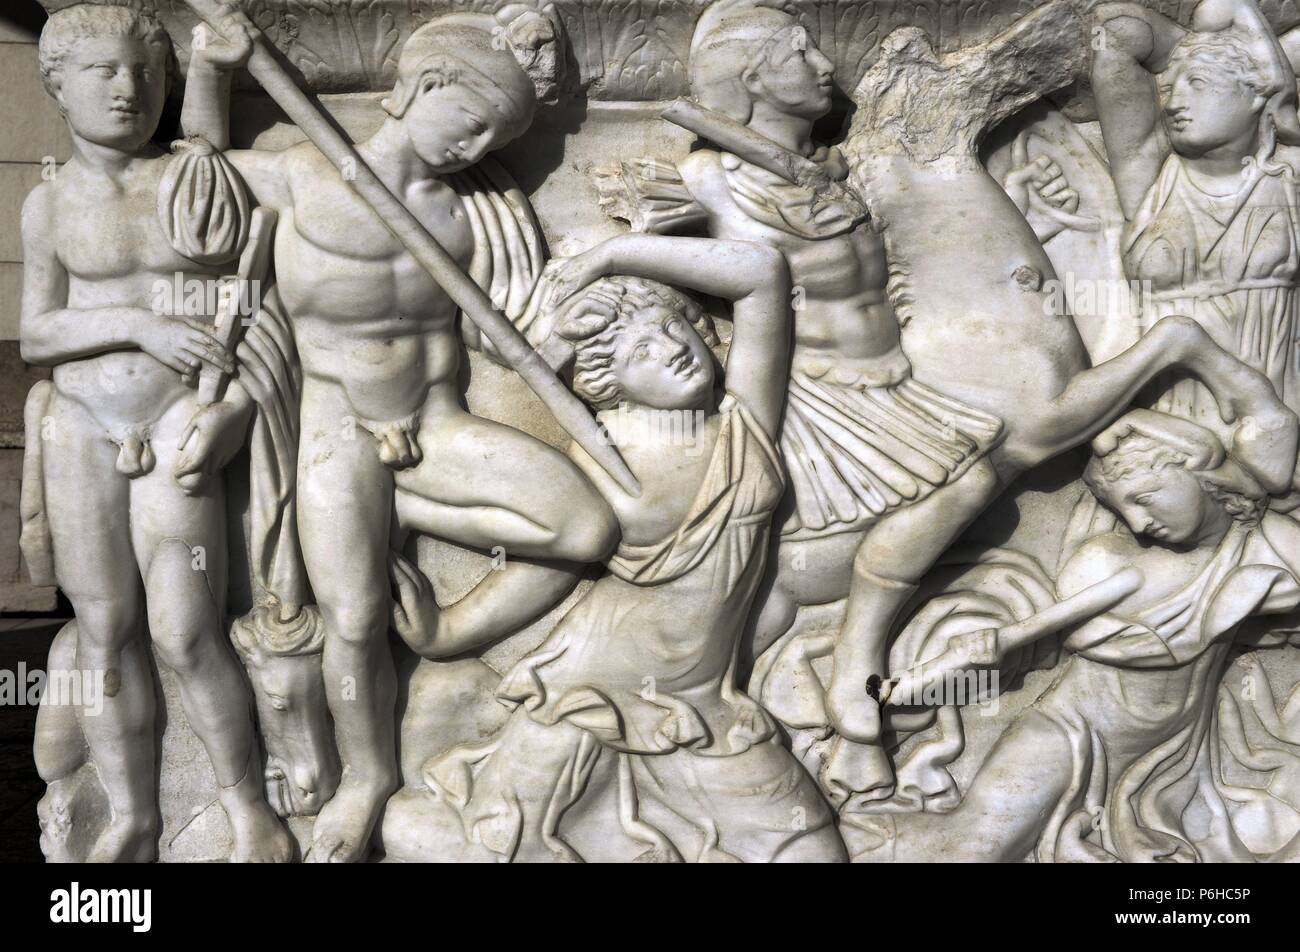 Amazon sarcophagus. Marble. Tel Mevorah. Roman Period. Early 3rd century AD. Detail. Batlle between the Amazons and the Greeks. Relief. Rockefeller Archaeological Museum. Jerusalem. Israel. Stock Photo